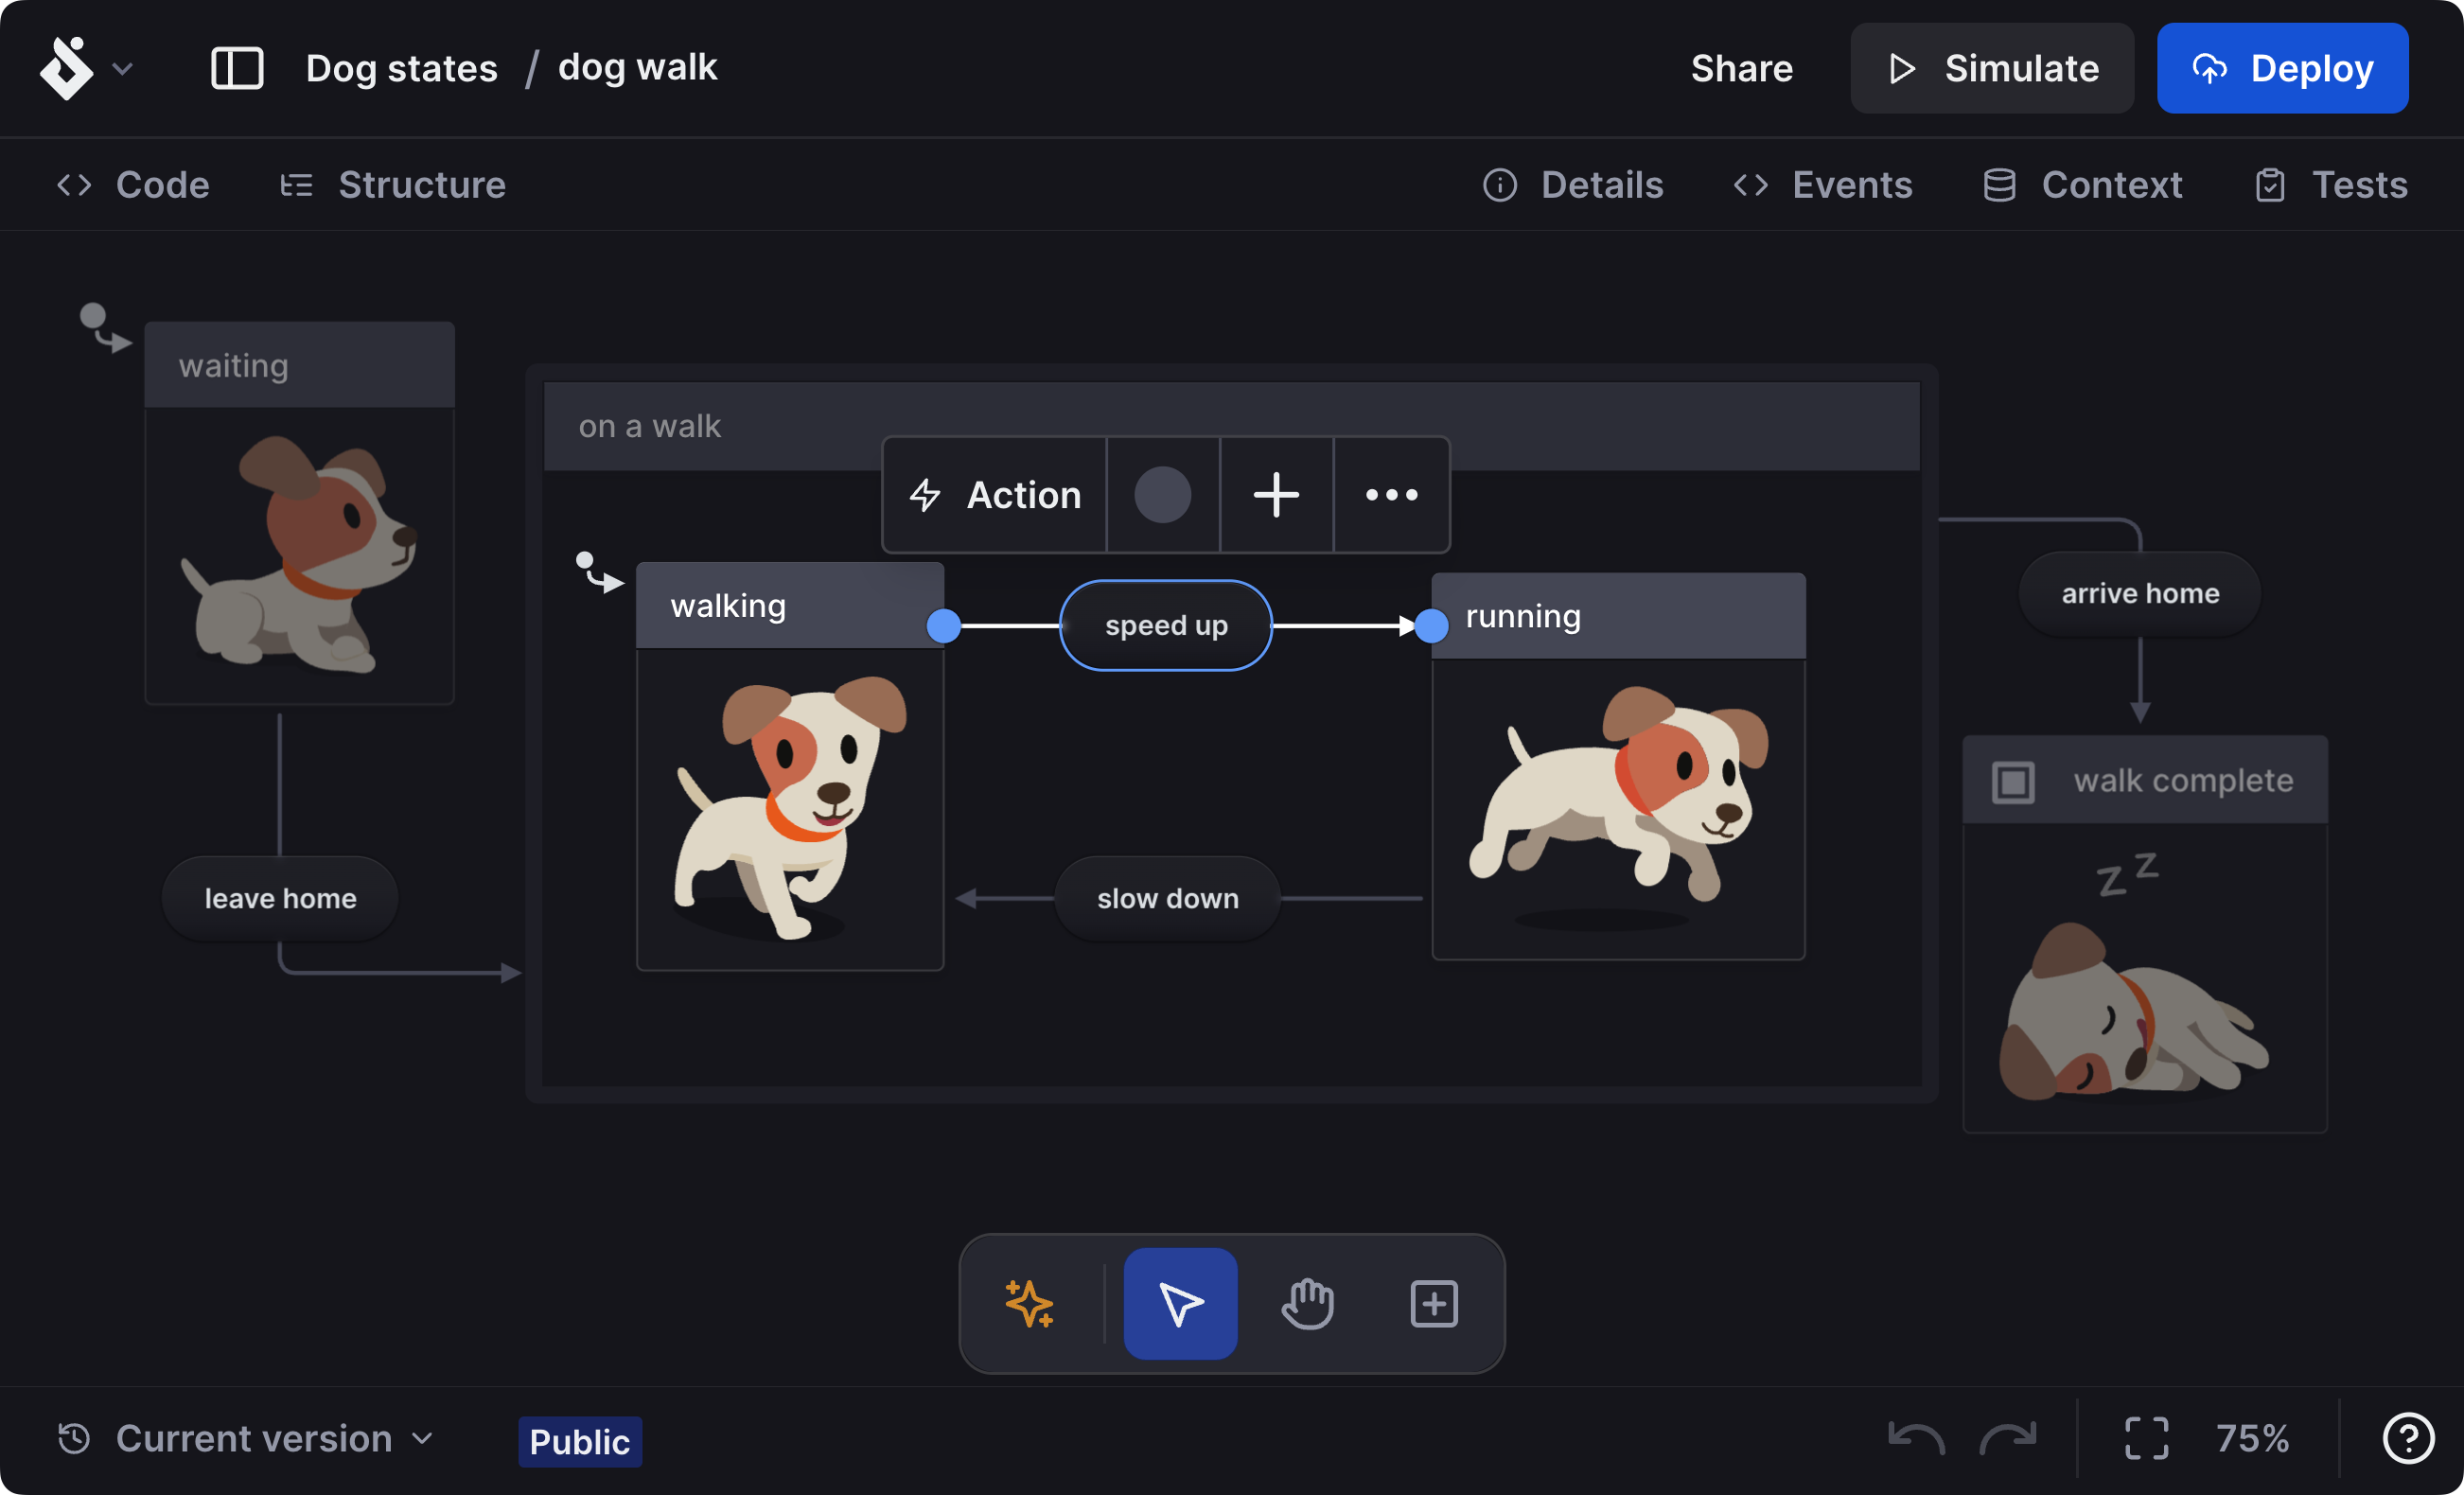 A dog walk machine open in Stately Studio’s editor. The dog walk machine has cute puppy images for each state, showing a dog walking and running. The speed up event is selected, and information and options for that transition is shown in an inspector panel on the right.